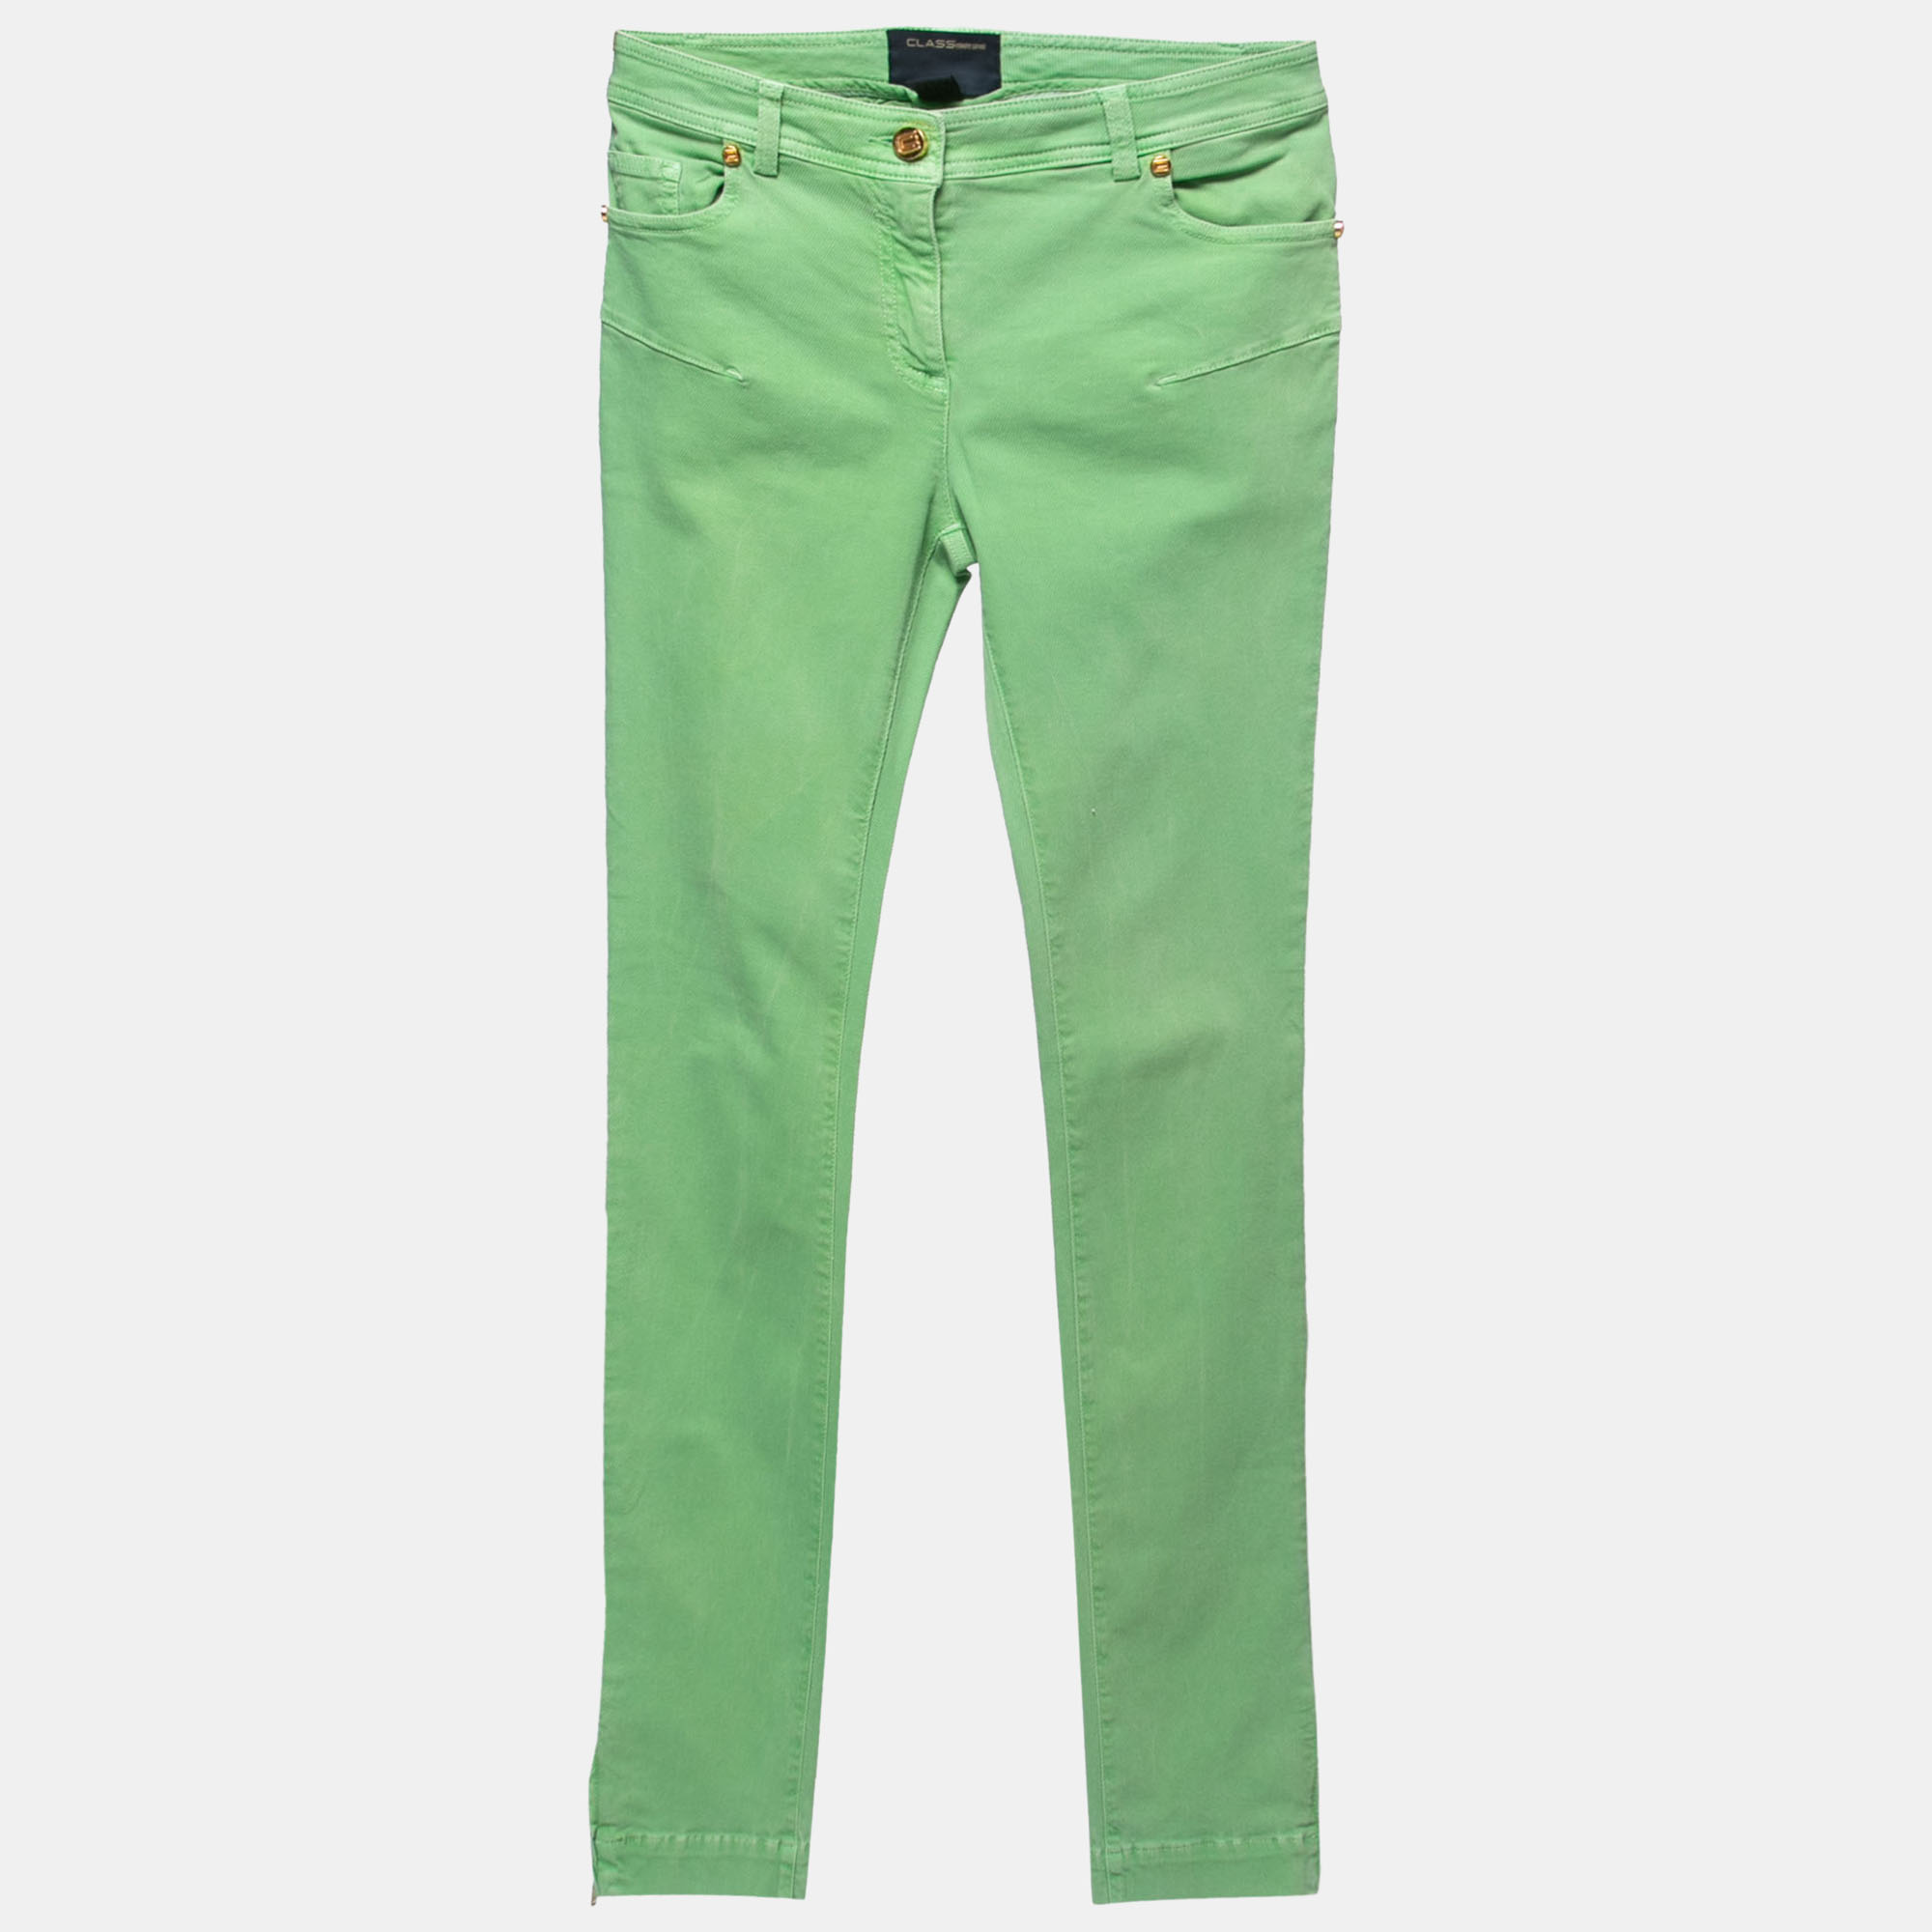 Pre-owned Class By Roberto Cavalli Class By Roberto Lime Green Denim Skinny Jeans S Waist 26"